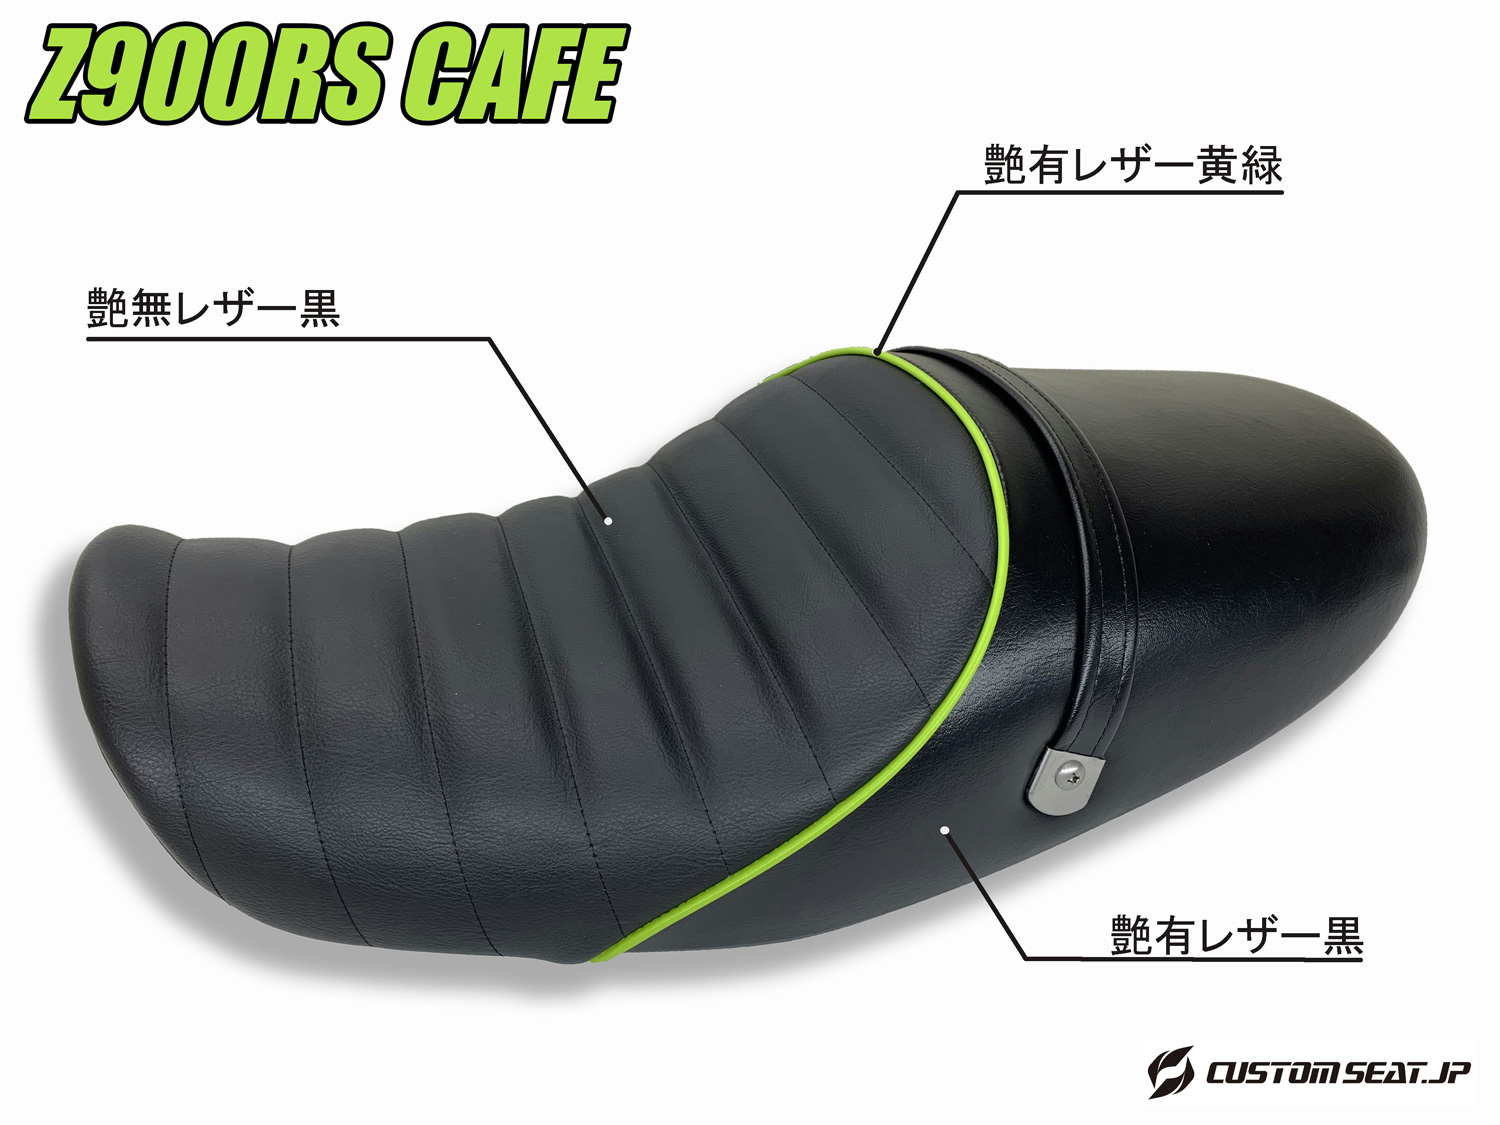 Z900RS CAFEカフェのシート張替え